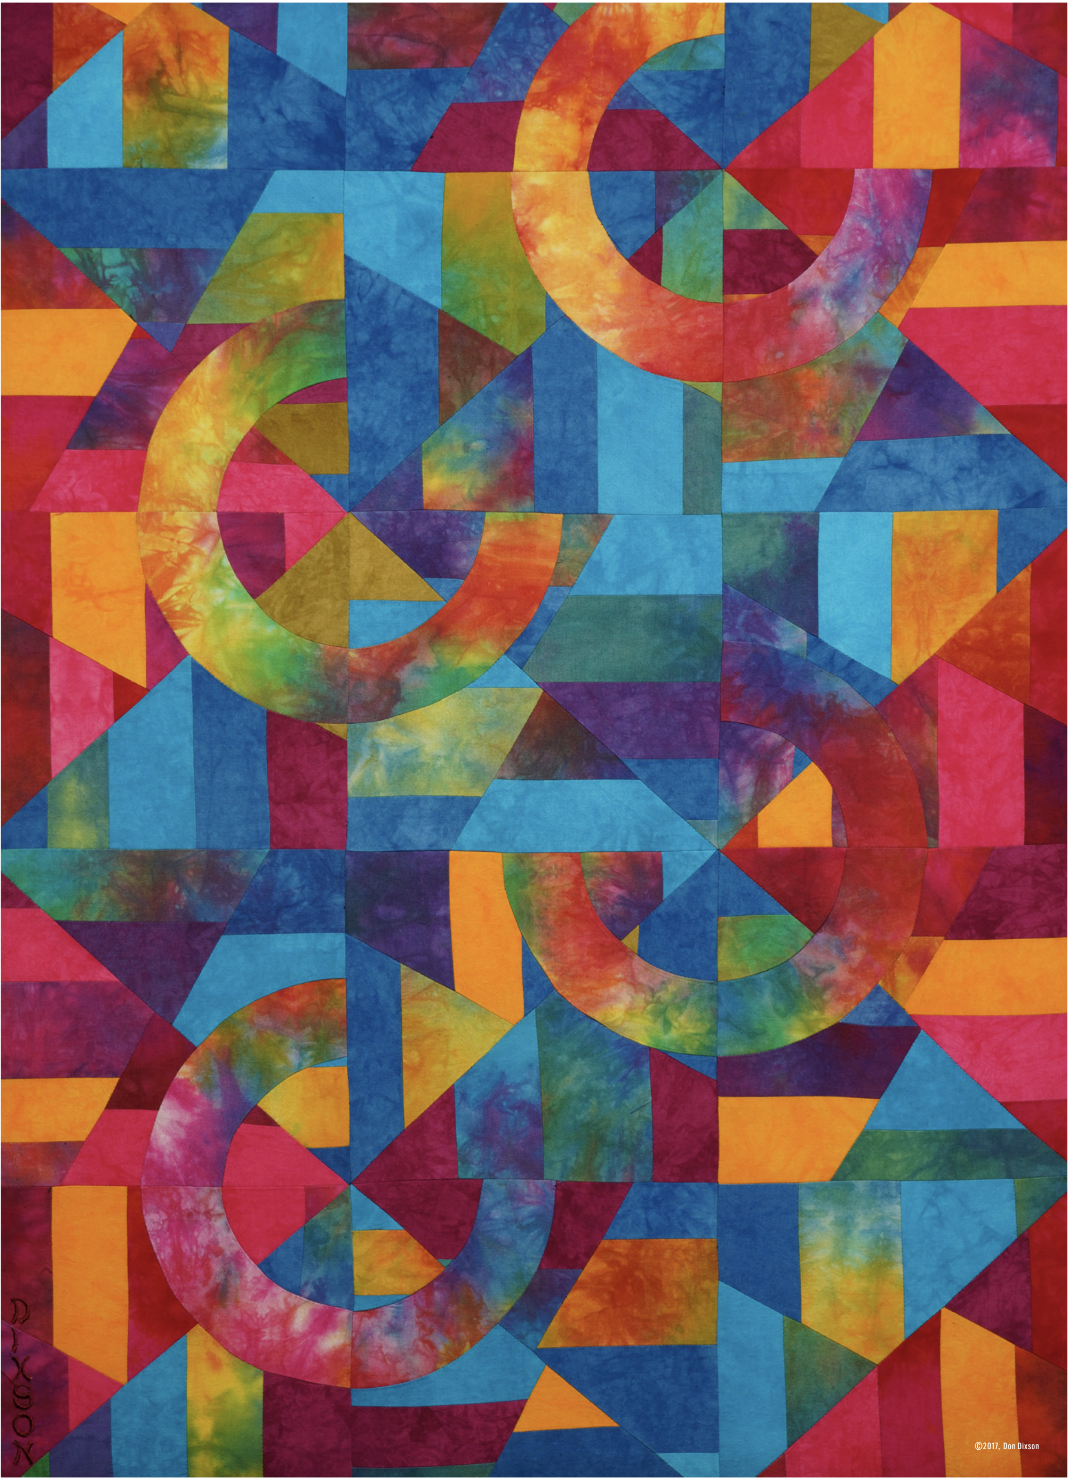 Fire & Ice colorful quilt puzzle by TOOZLE